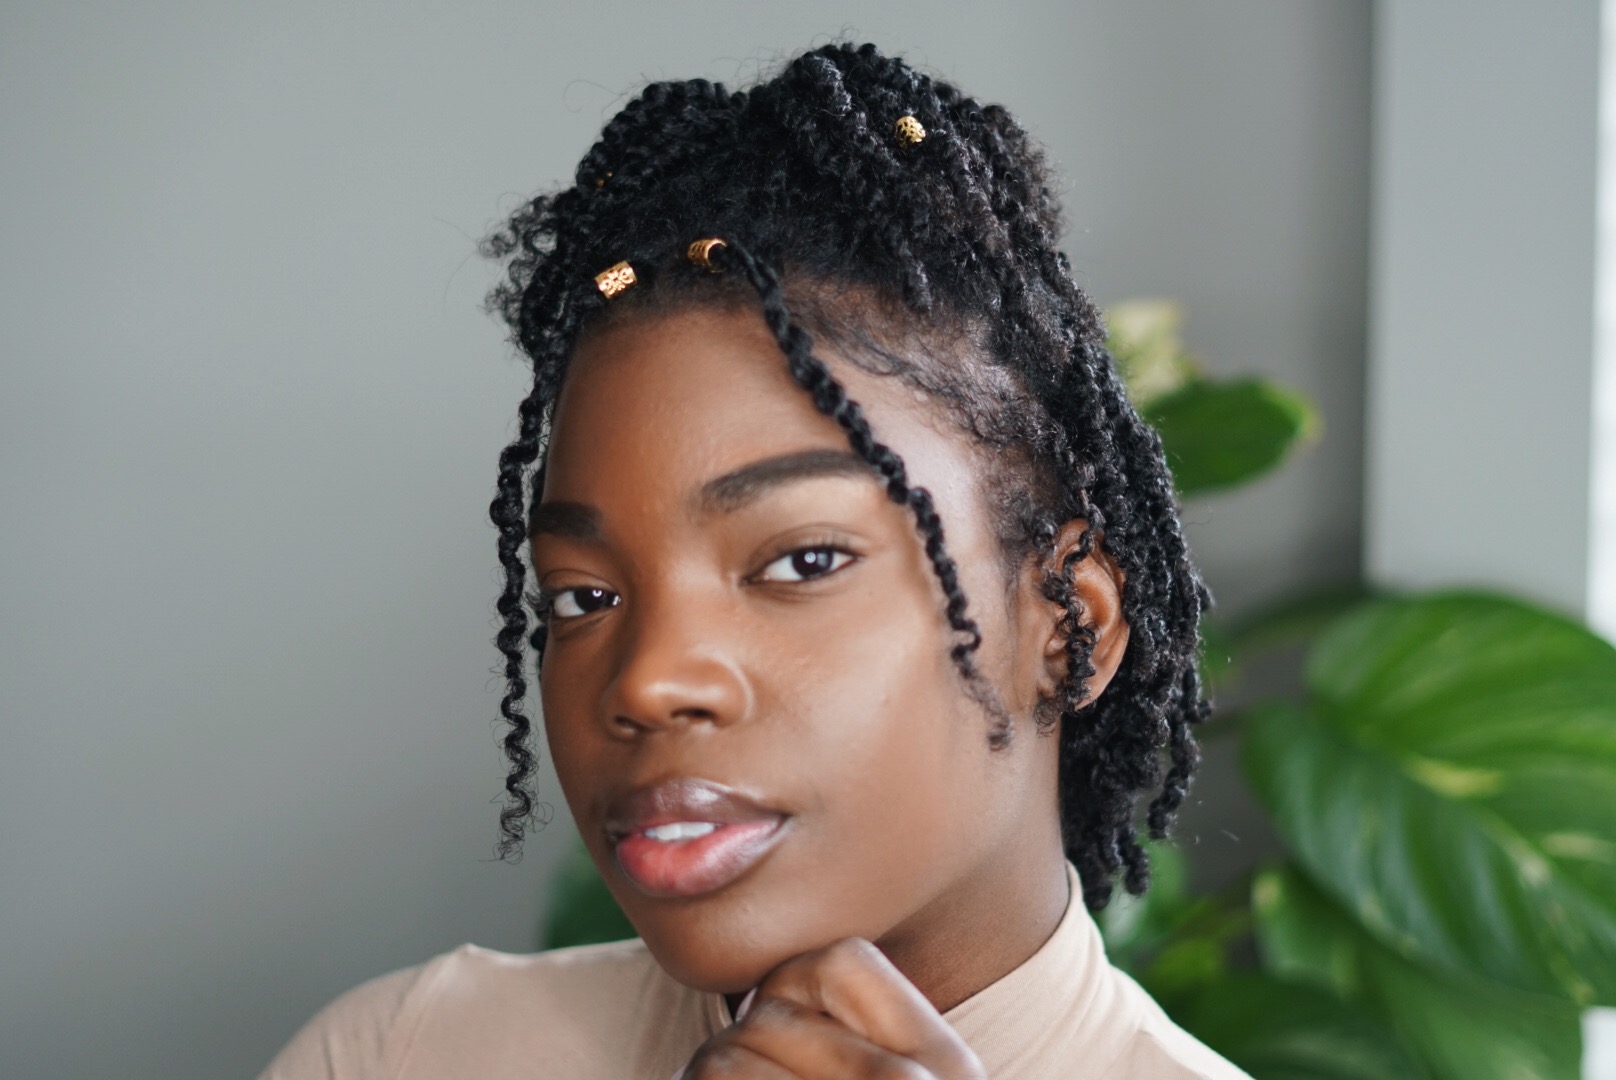 How I consistently achieve amazing mini twists as my protective style., mini  twist natural hair